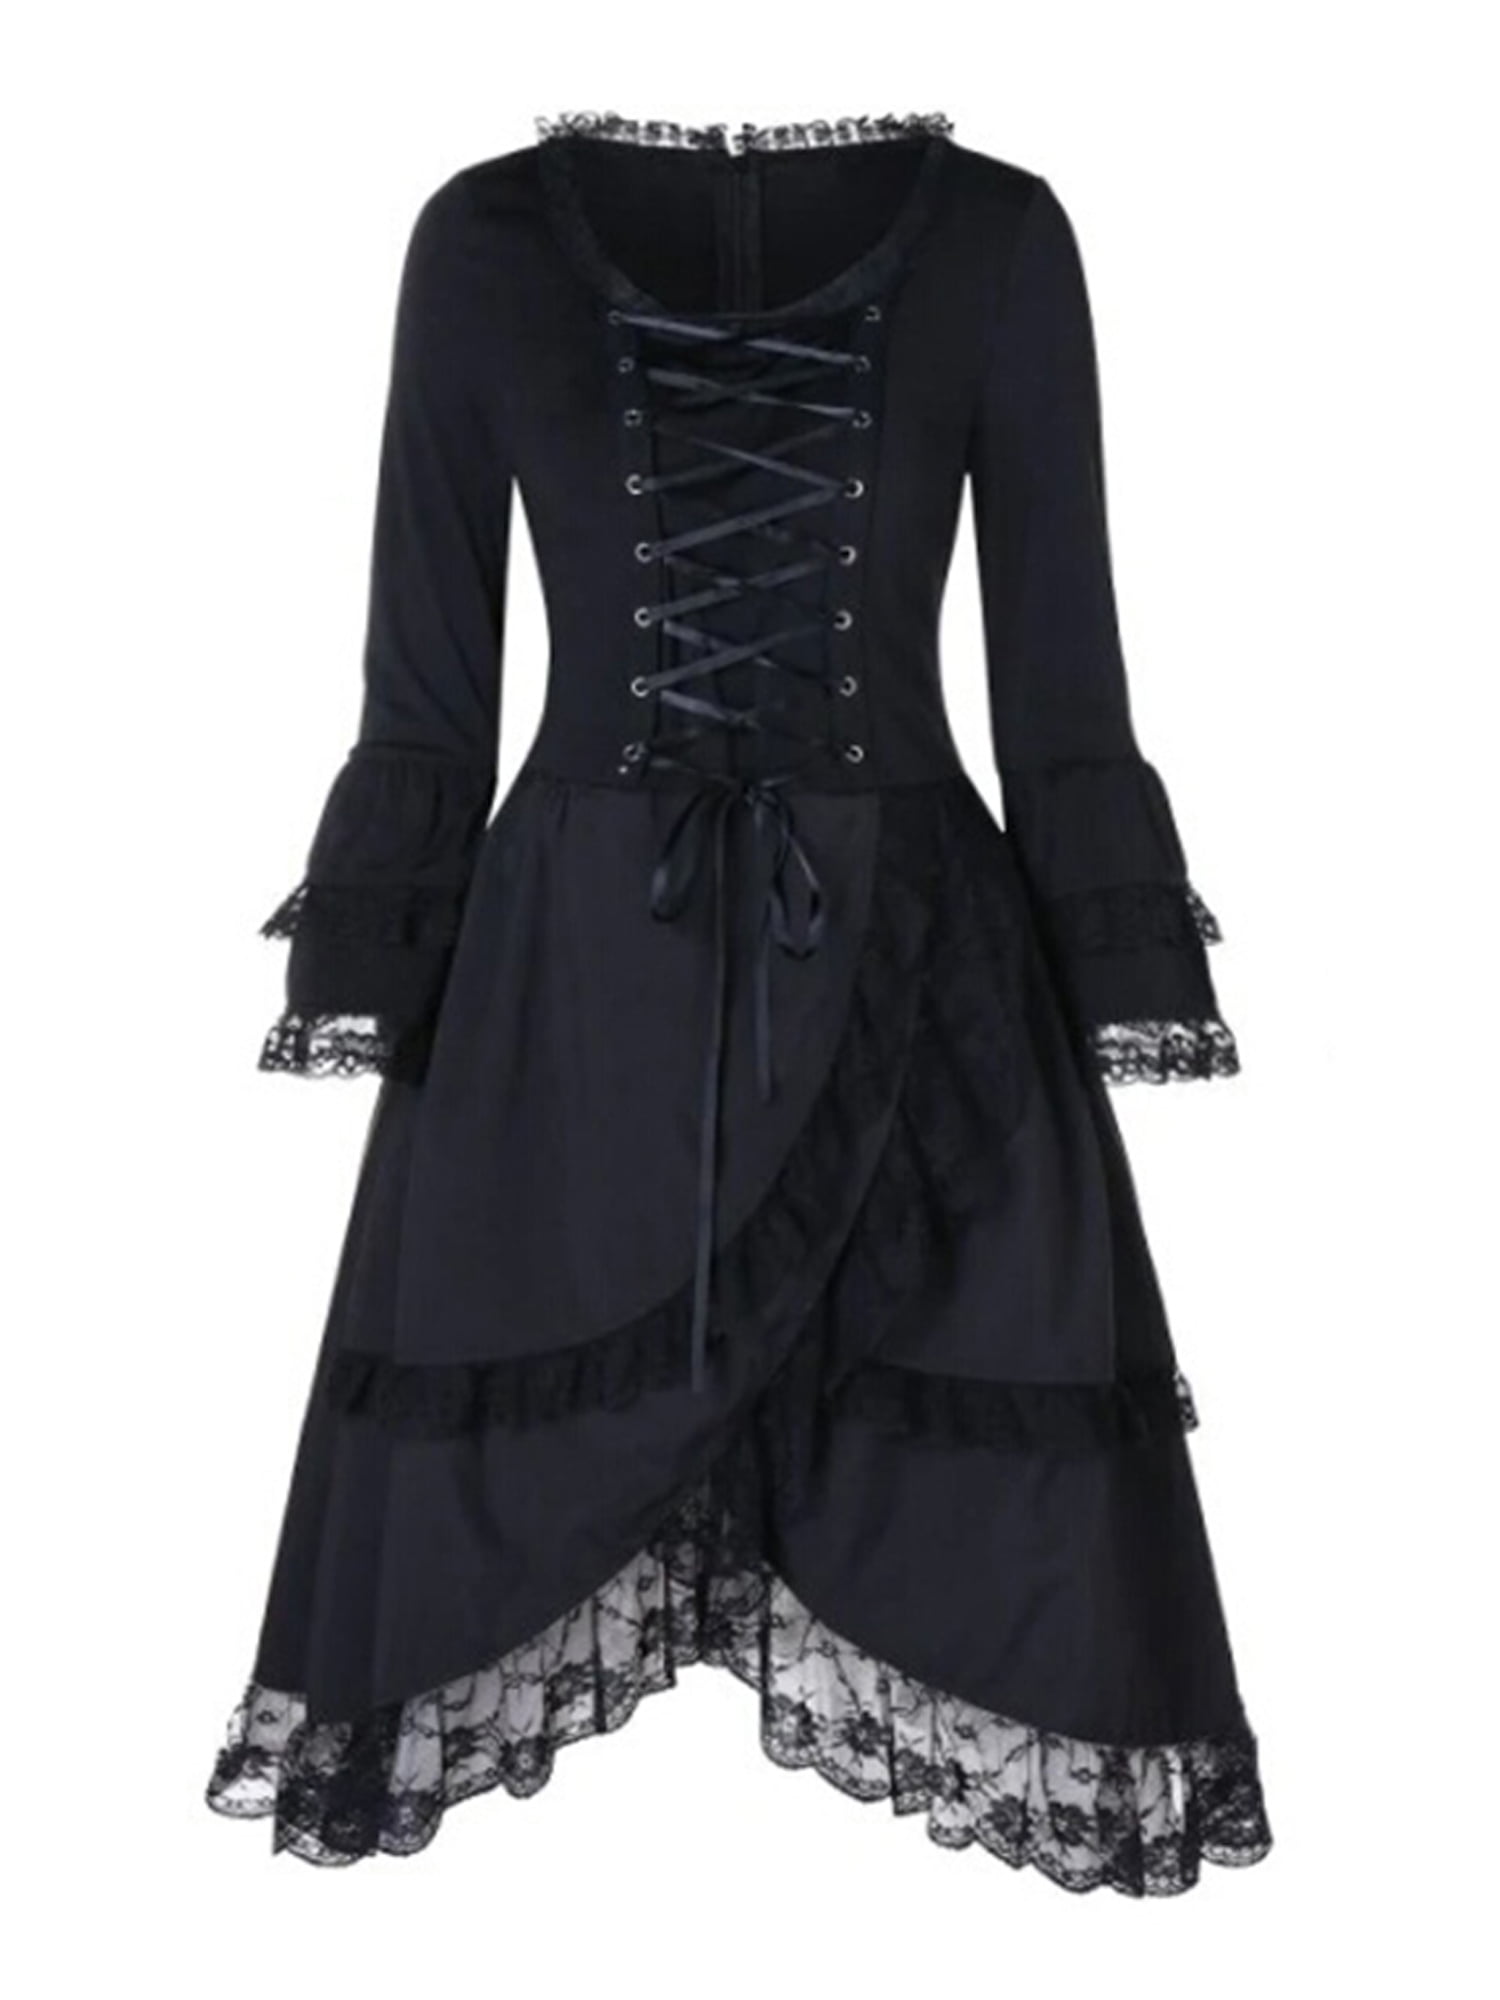 Witch Baby Dress Girls Black Lace petal Halloween Fancy Party Alternative Gothic 